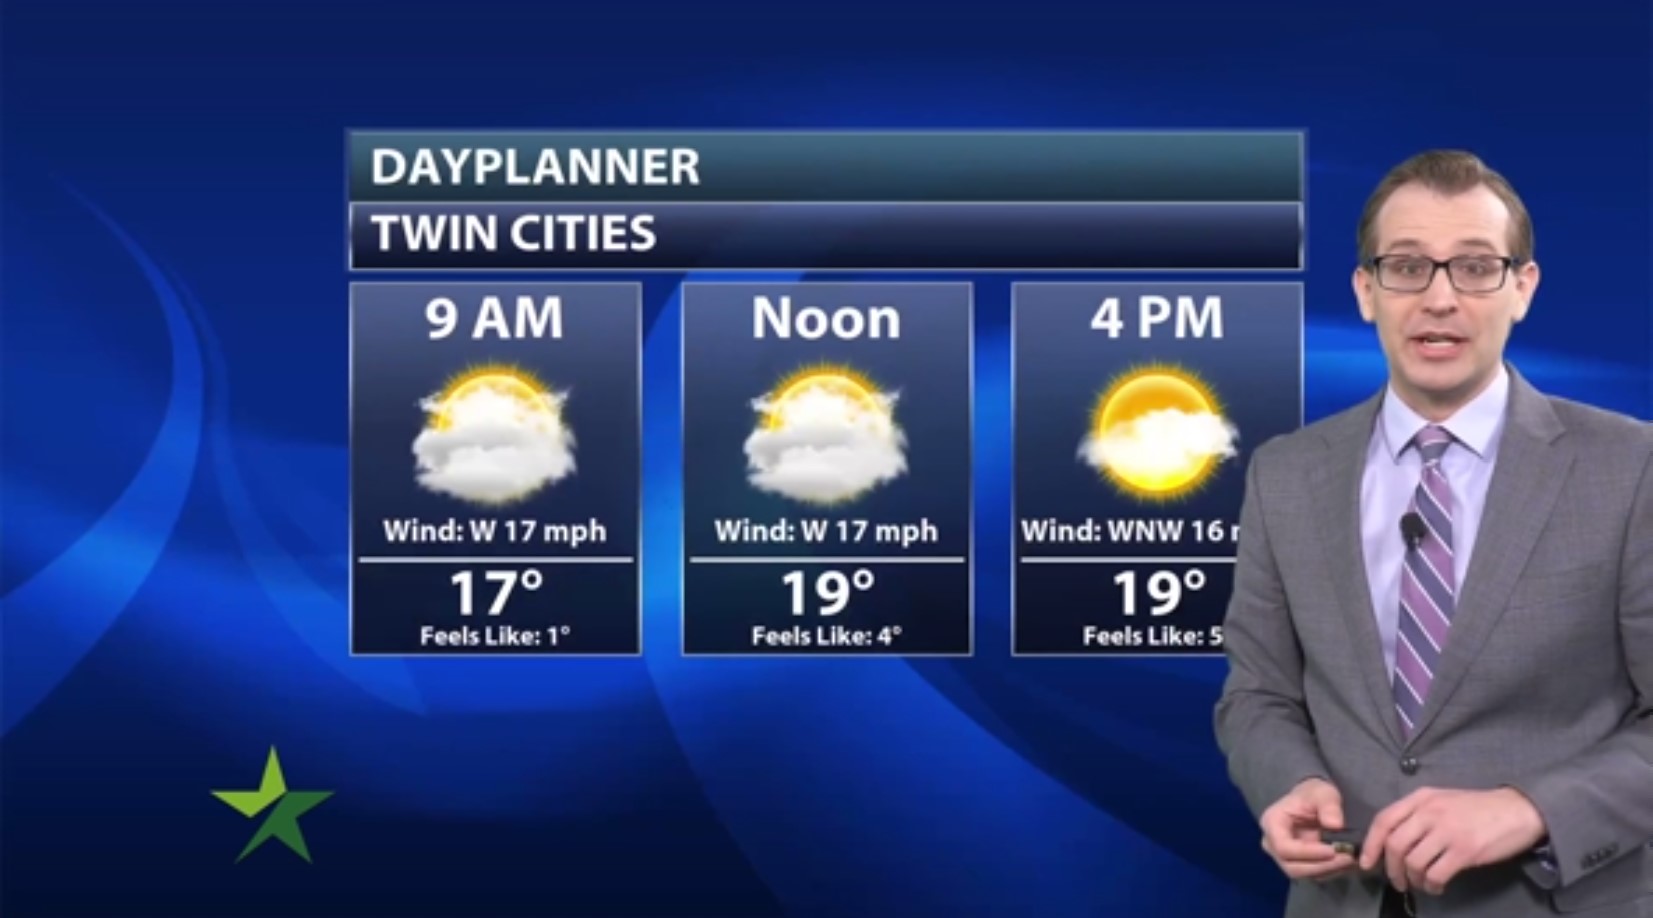 Morning forecast: Cold and windy, high 20